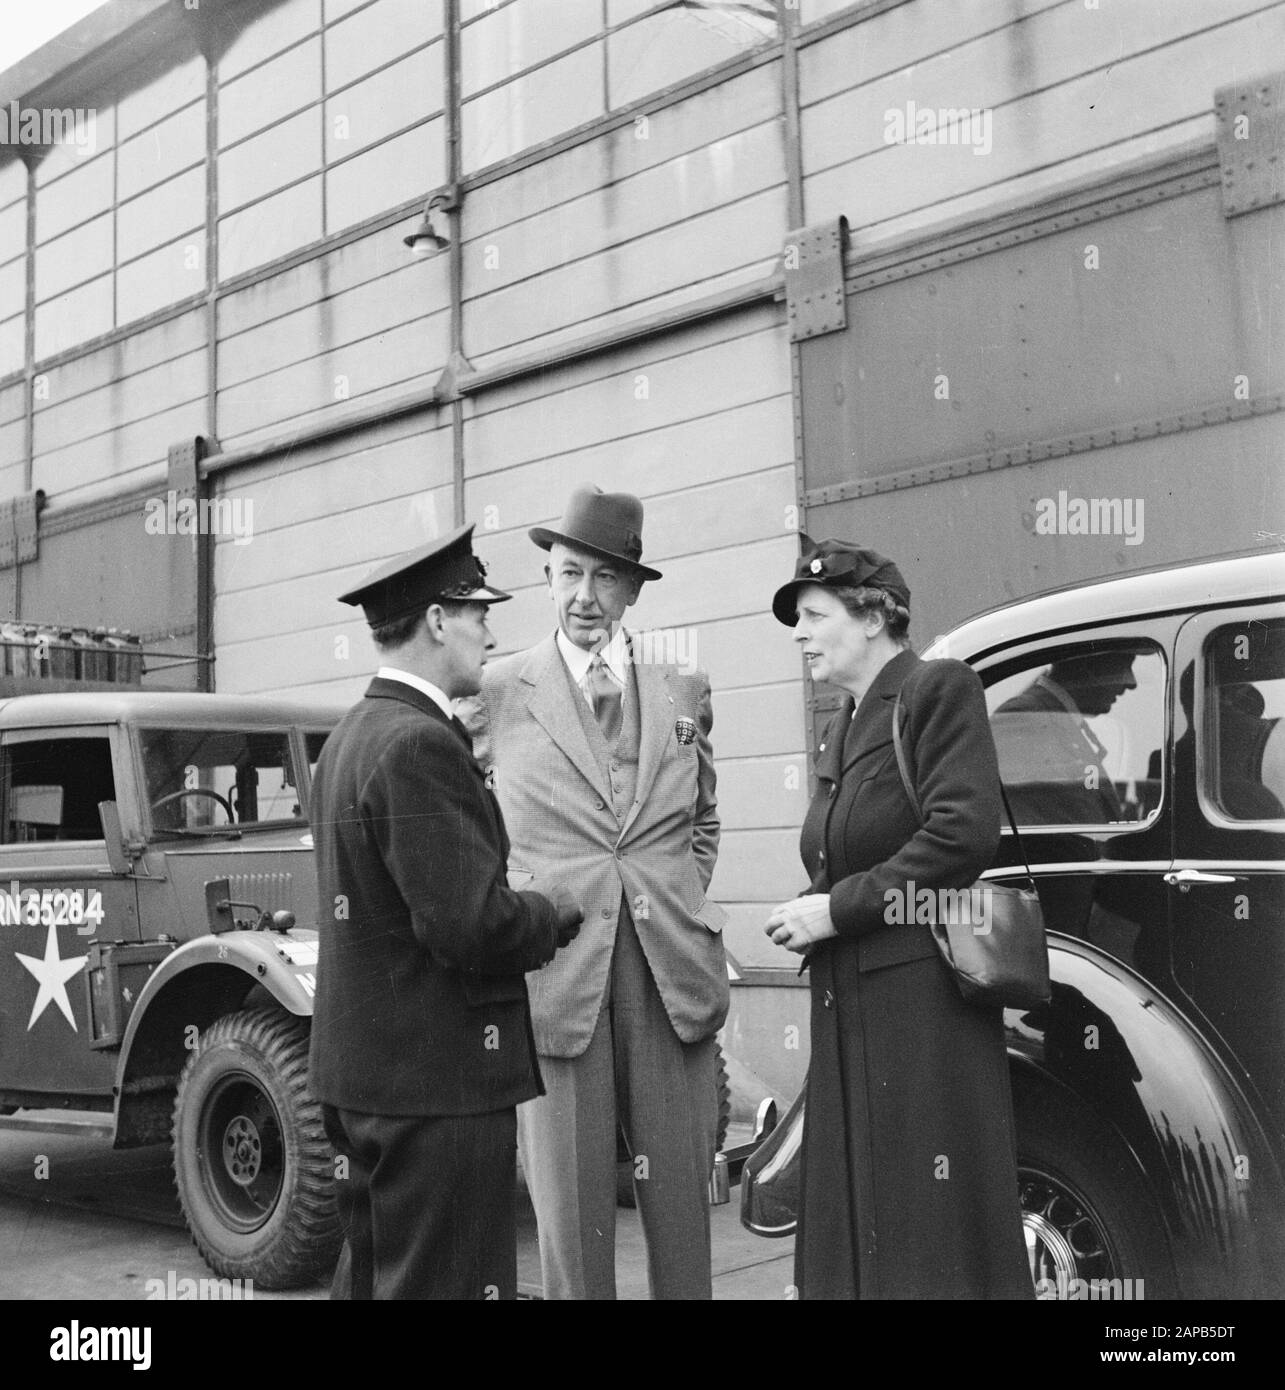 Diplomacy: English ambassador Description: Arrival of the English envoy Sir Neville Bland at the Lloydskade in Rotterdam. Sir Neville Bland and wife meet their old driver L.P. Luit, who had the Ambassador's car in hiding and stayed in the Netherlands Date: 25 May 1945 Location: Rotterdam, Zuid-Holland Keywords: cars, diplomats Personal name: Bland, Neville, Luit L P Stock Photo